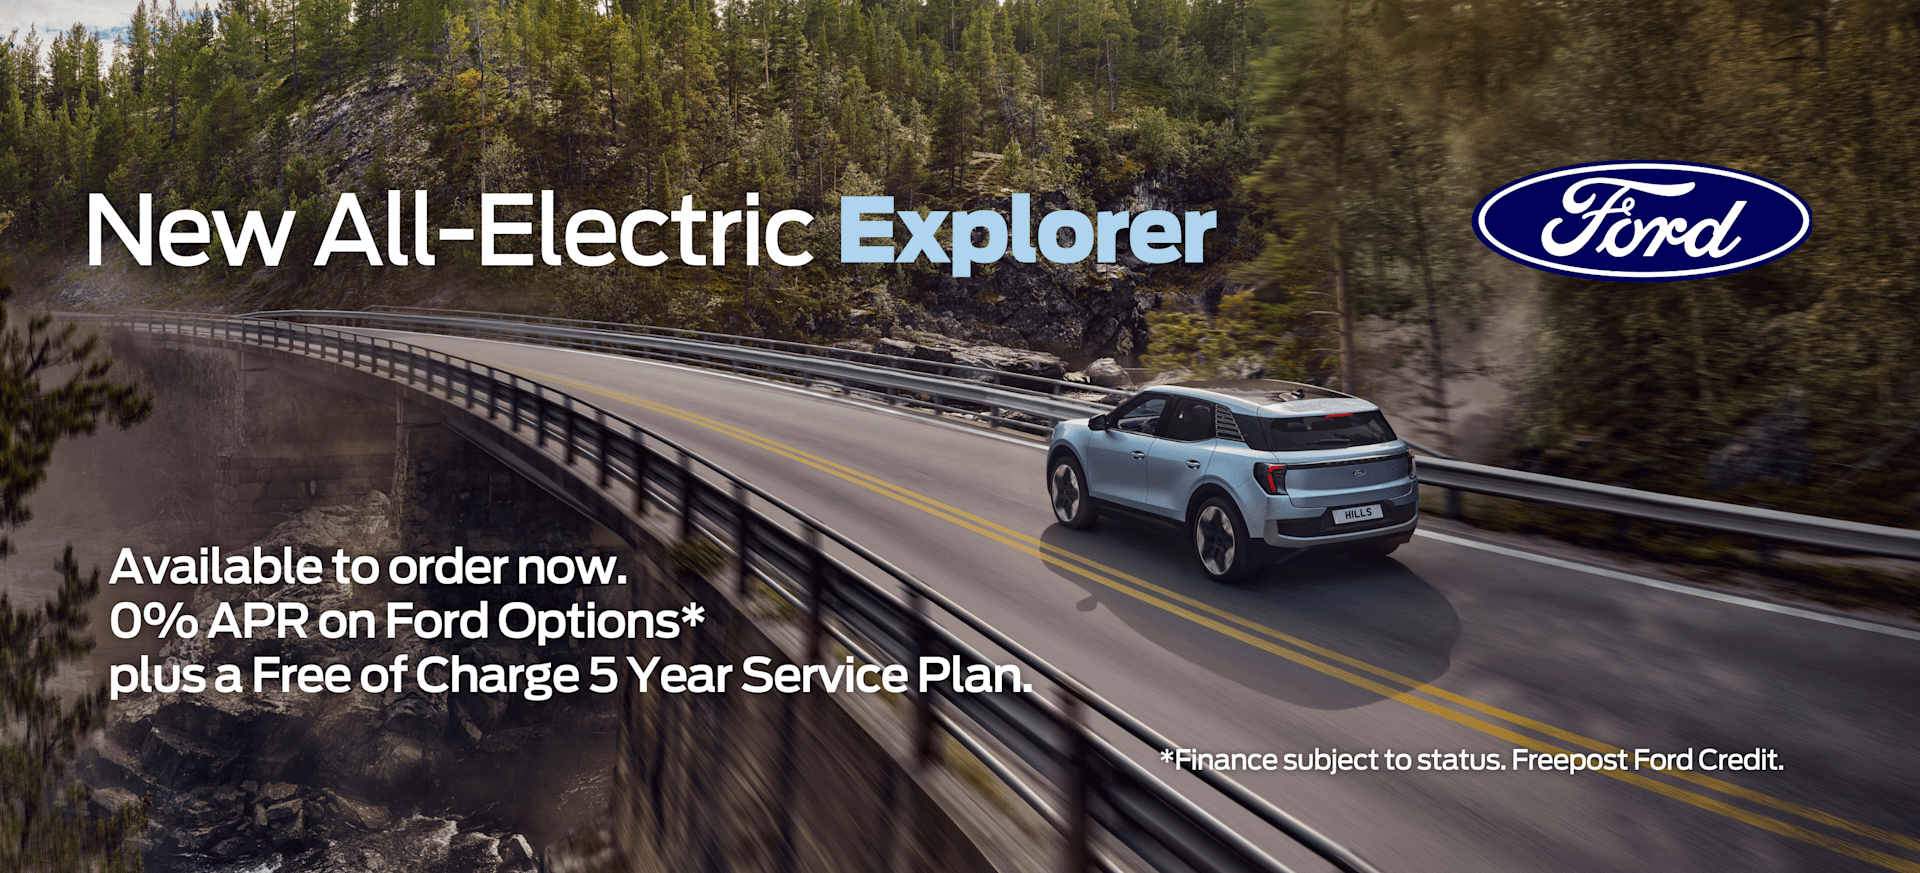 New All-Electric Explorer